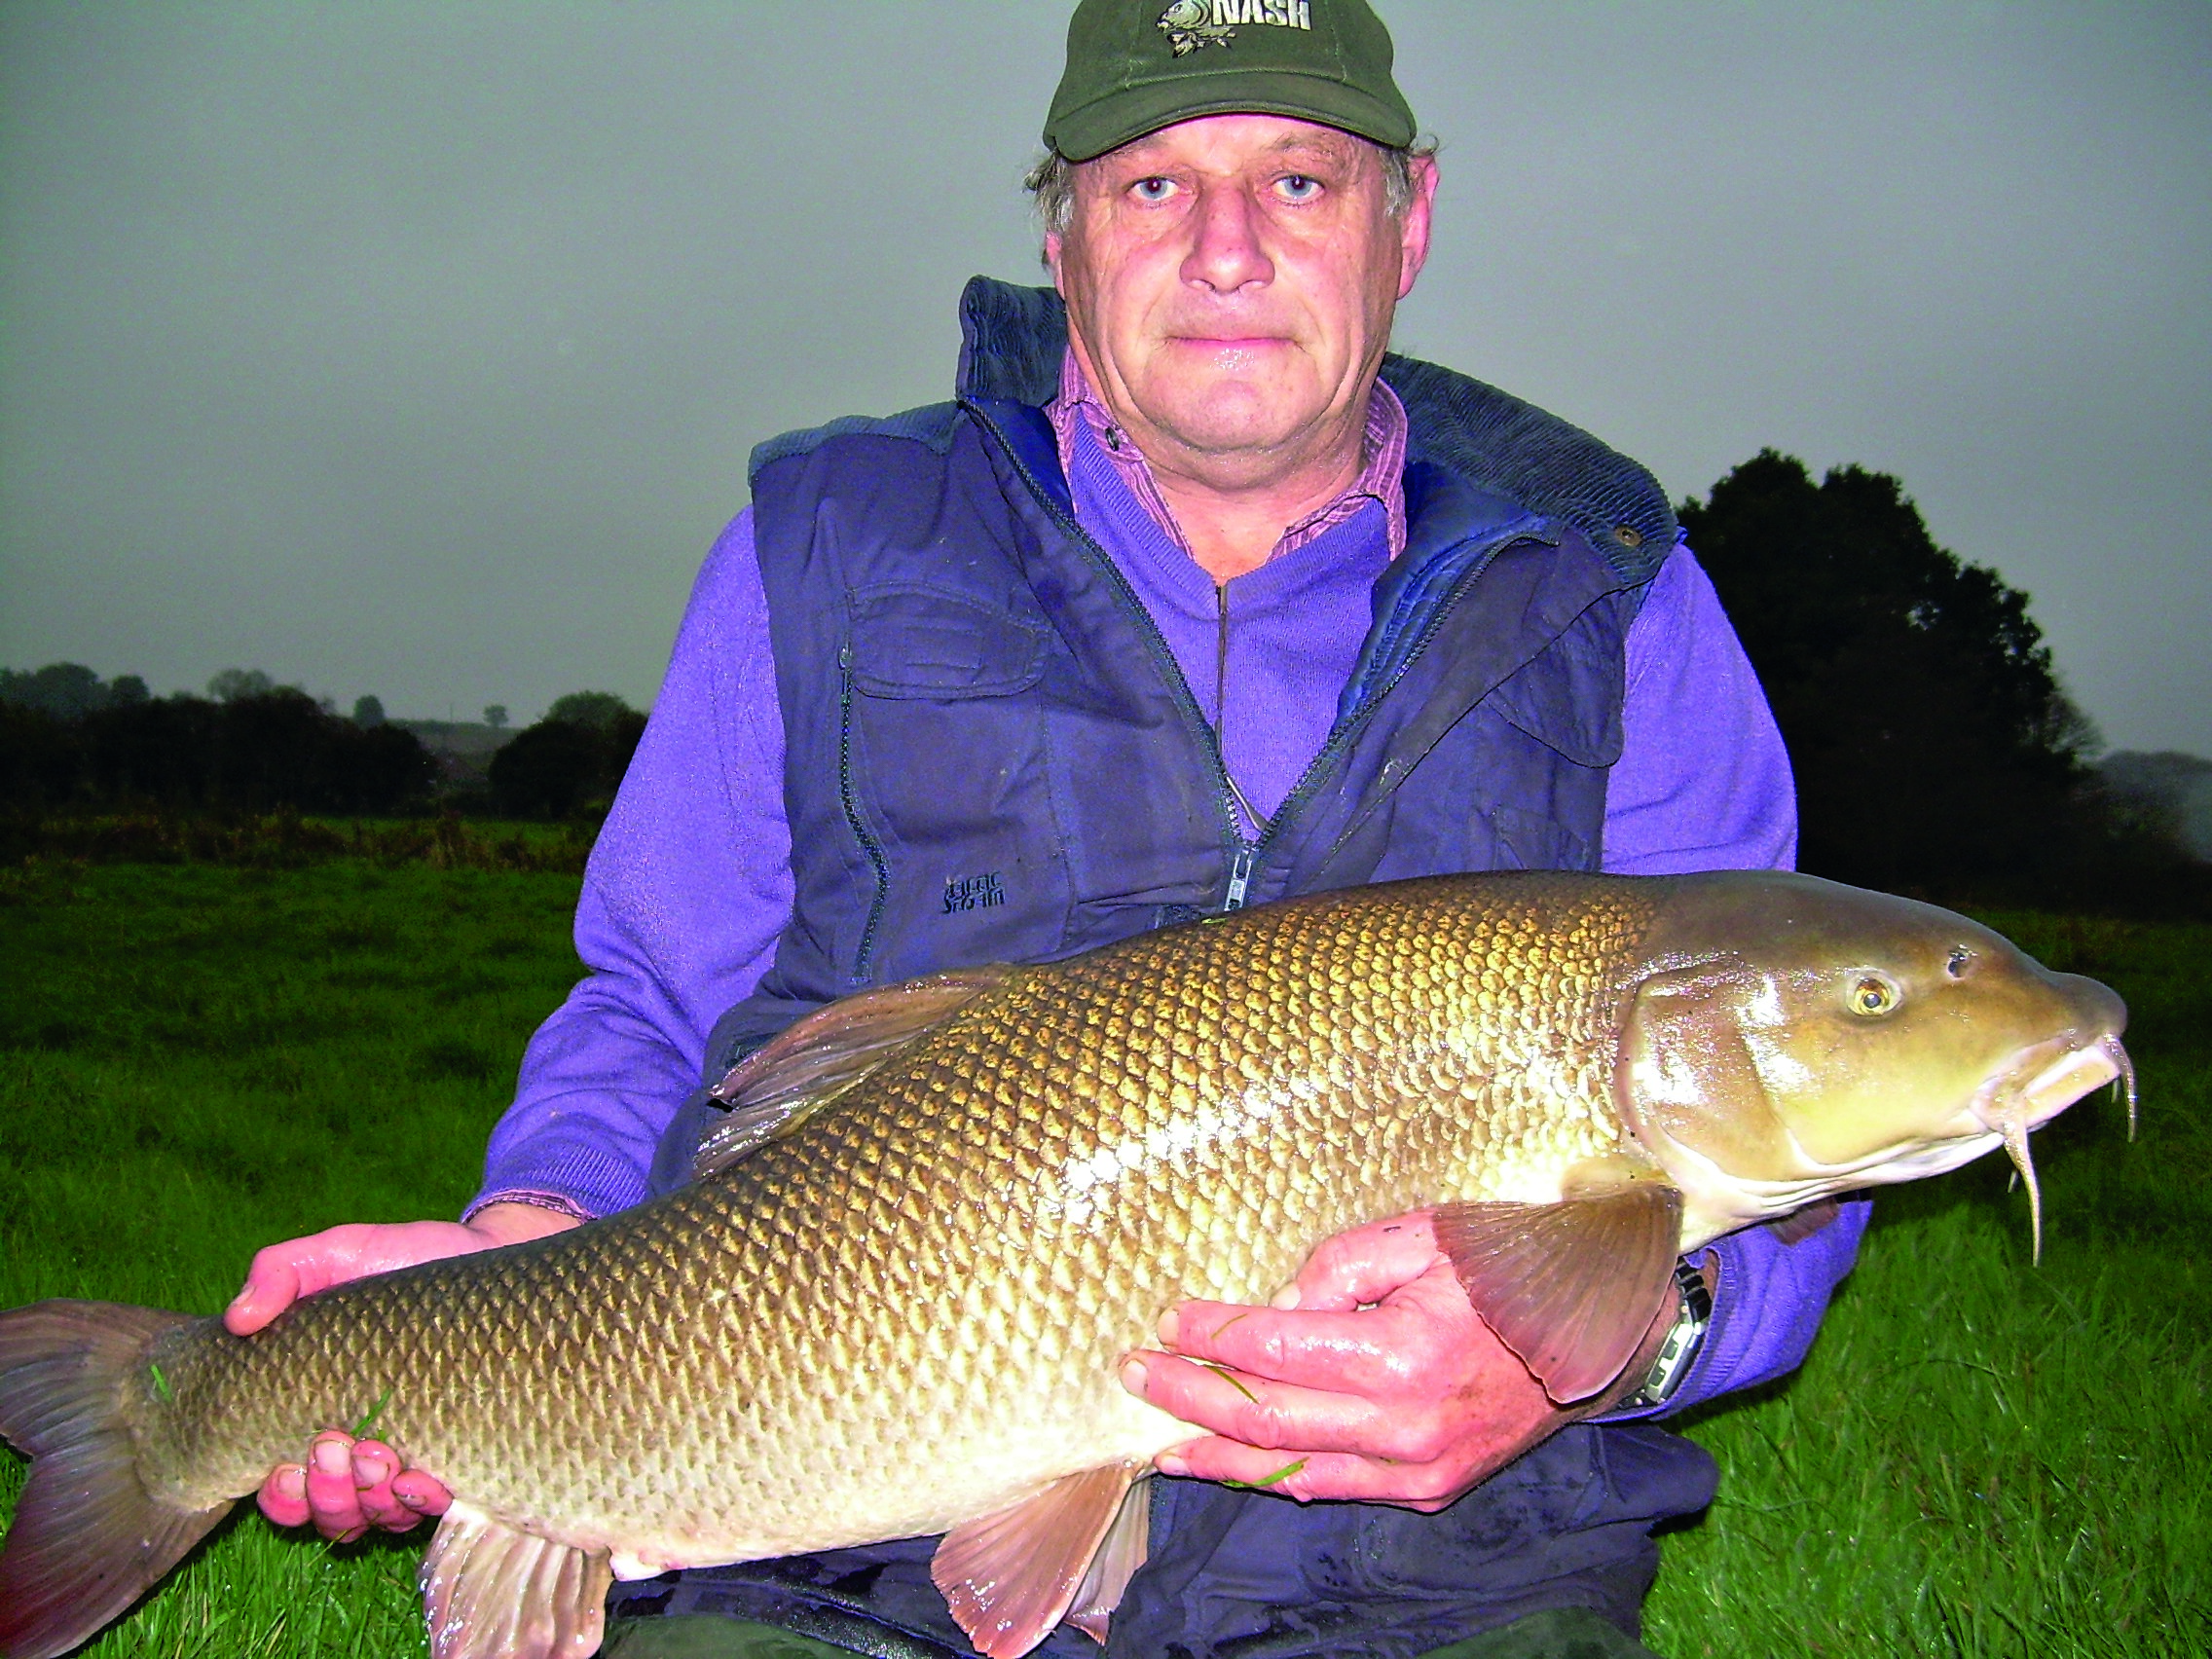 This giant River Wensum barbel, reported at the time at 21 lb 2 oz, sits at the top of the barbel Top 50. It is not however the official British barbel record!